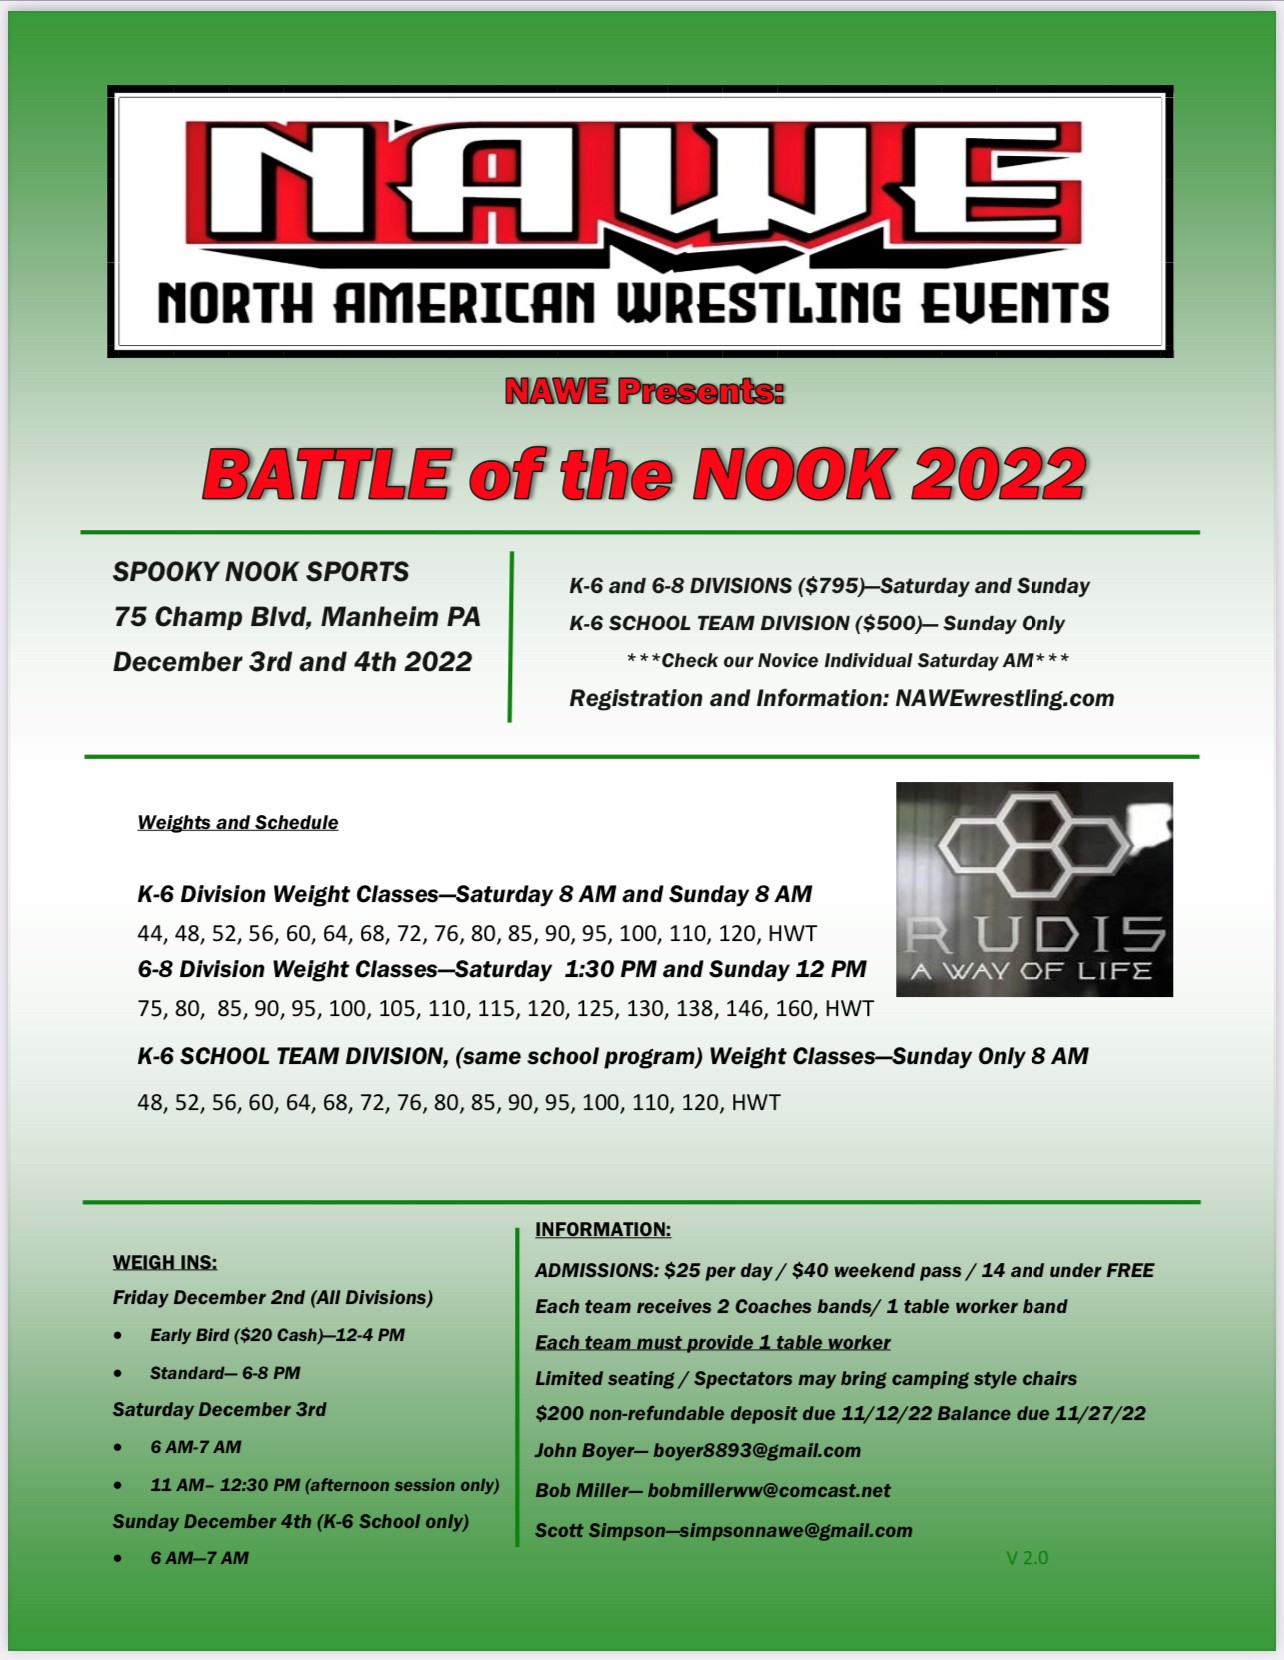 NAWE Presents battle of the nook 2022